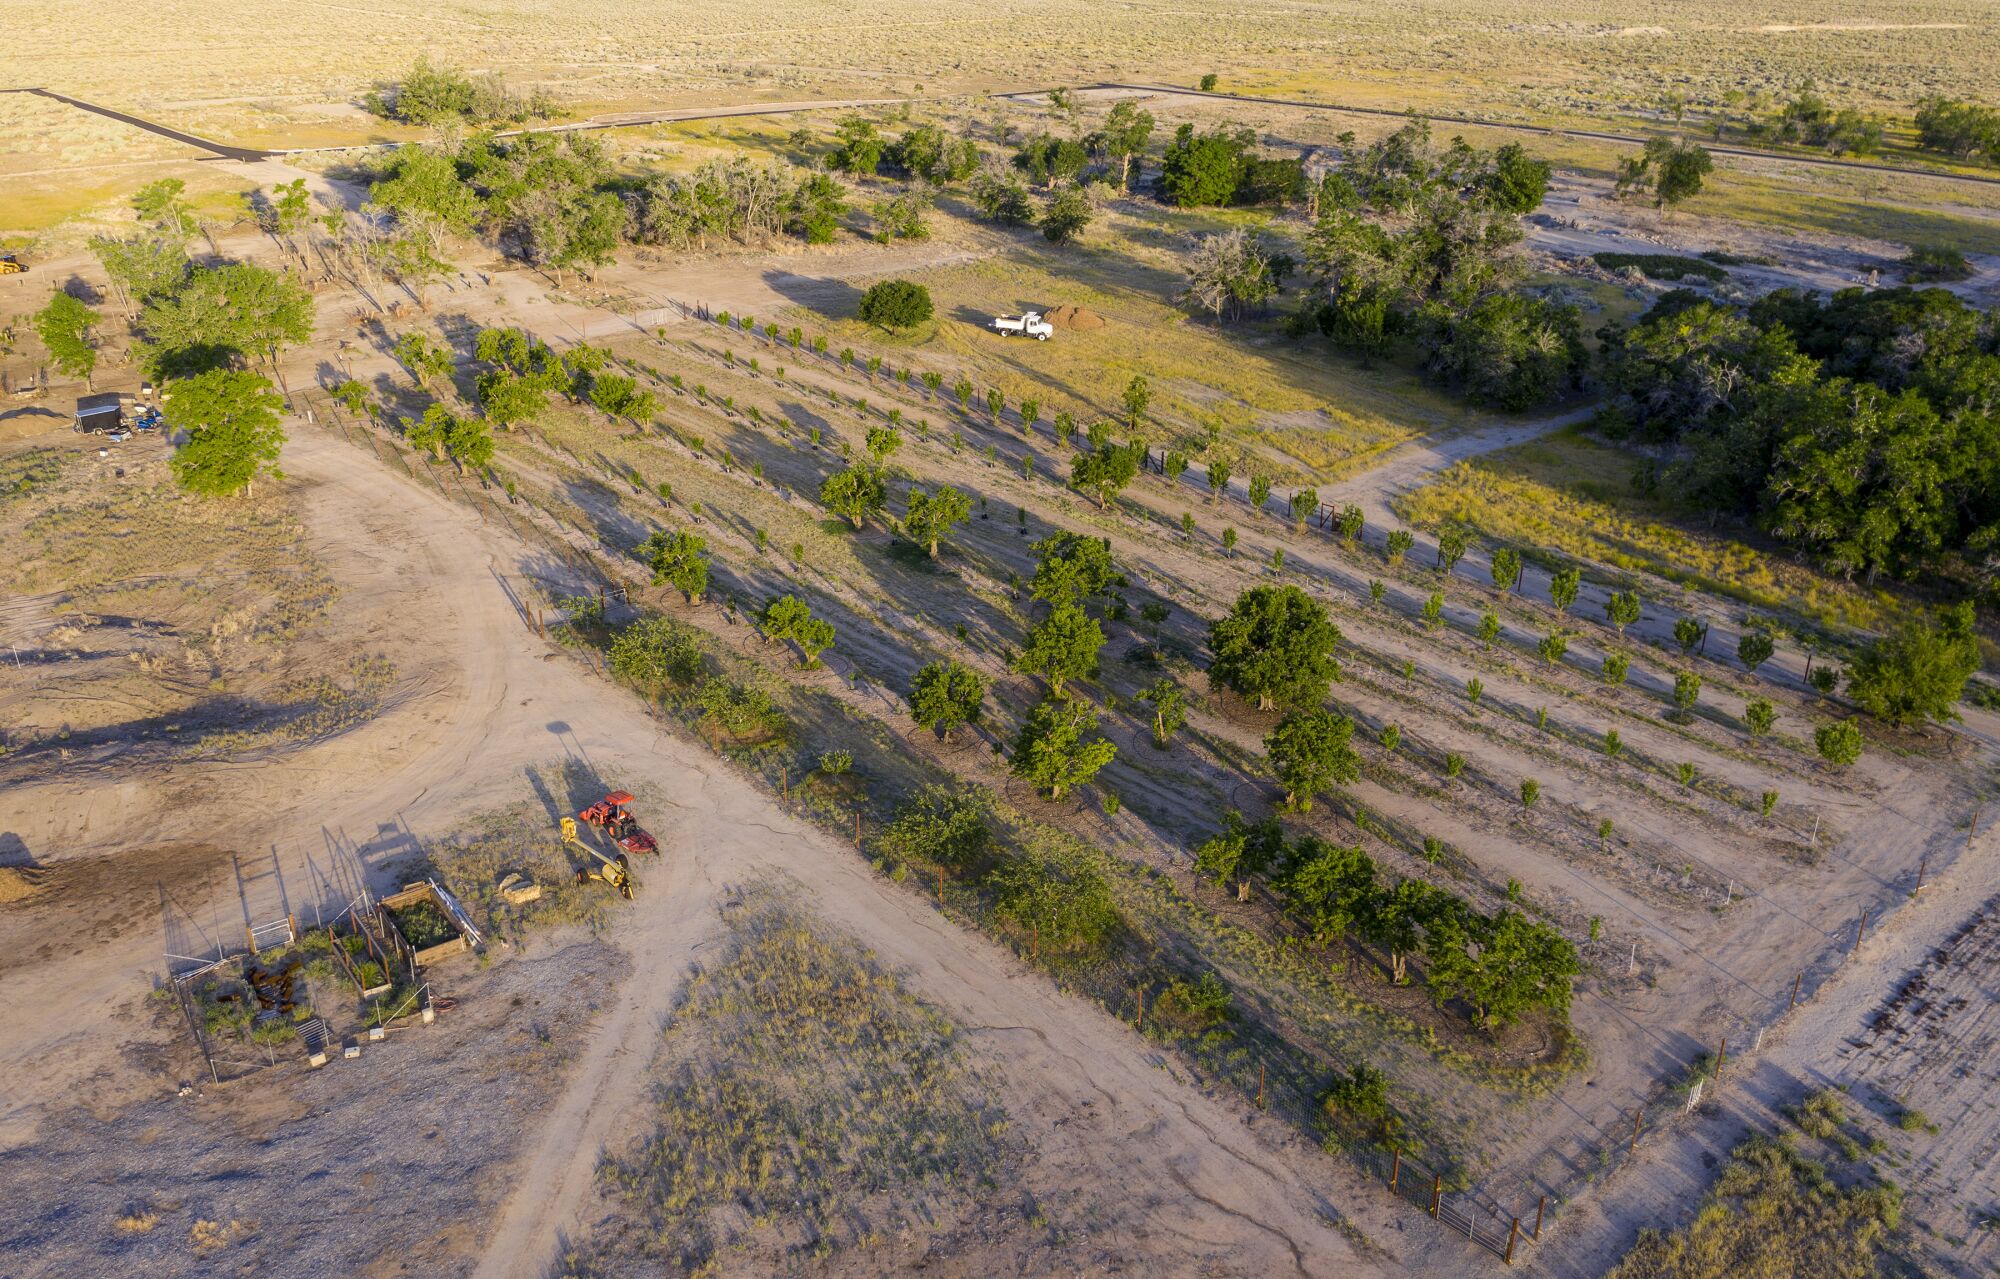 A drone view of the Manzanar National Historic Site fruit orchard.